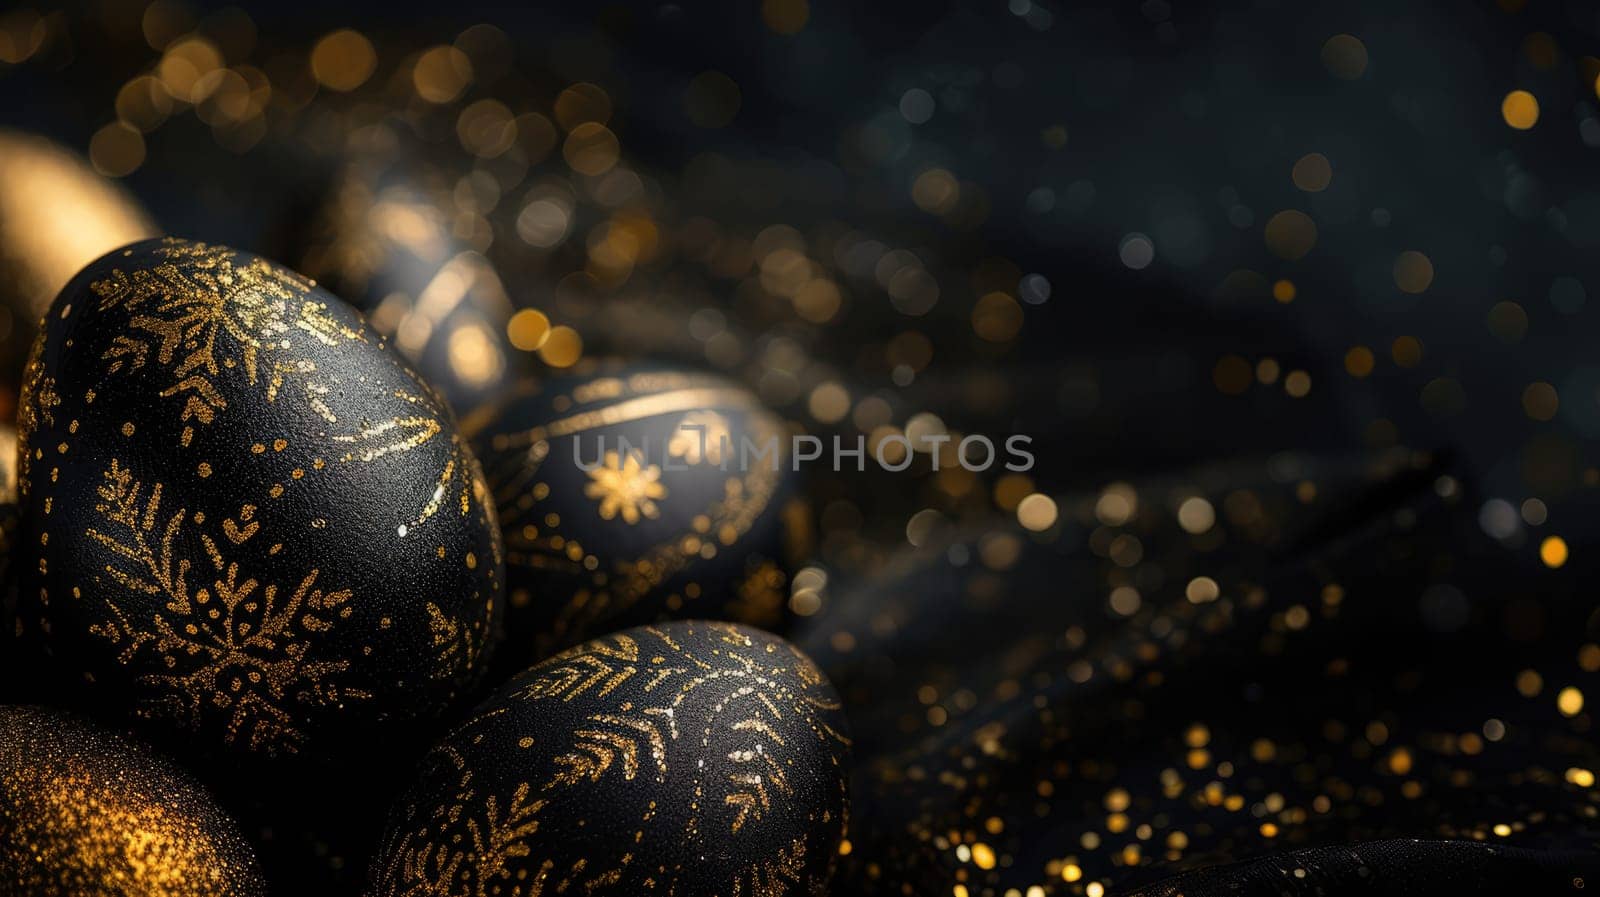 Gold metallic and black Easter Eggs on dark Background. Happy Easter eggs by JuliaDorian